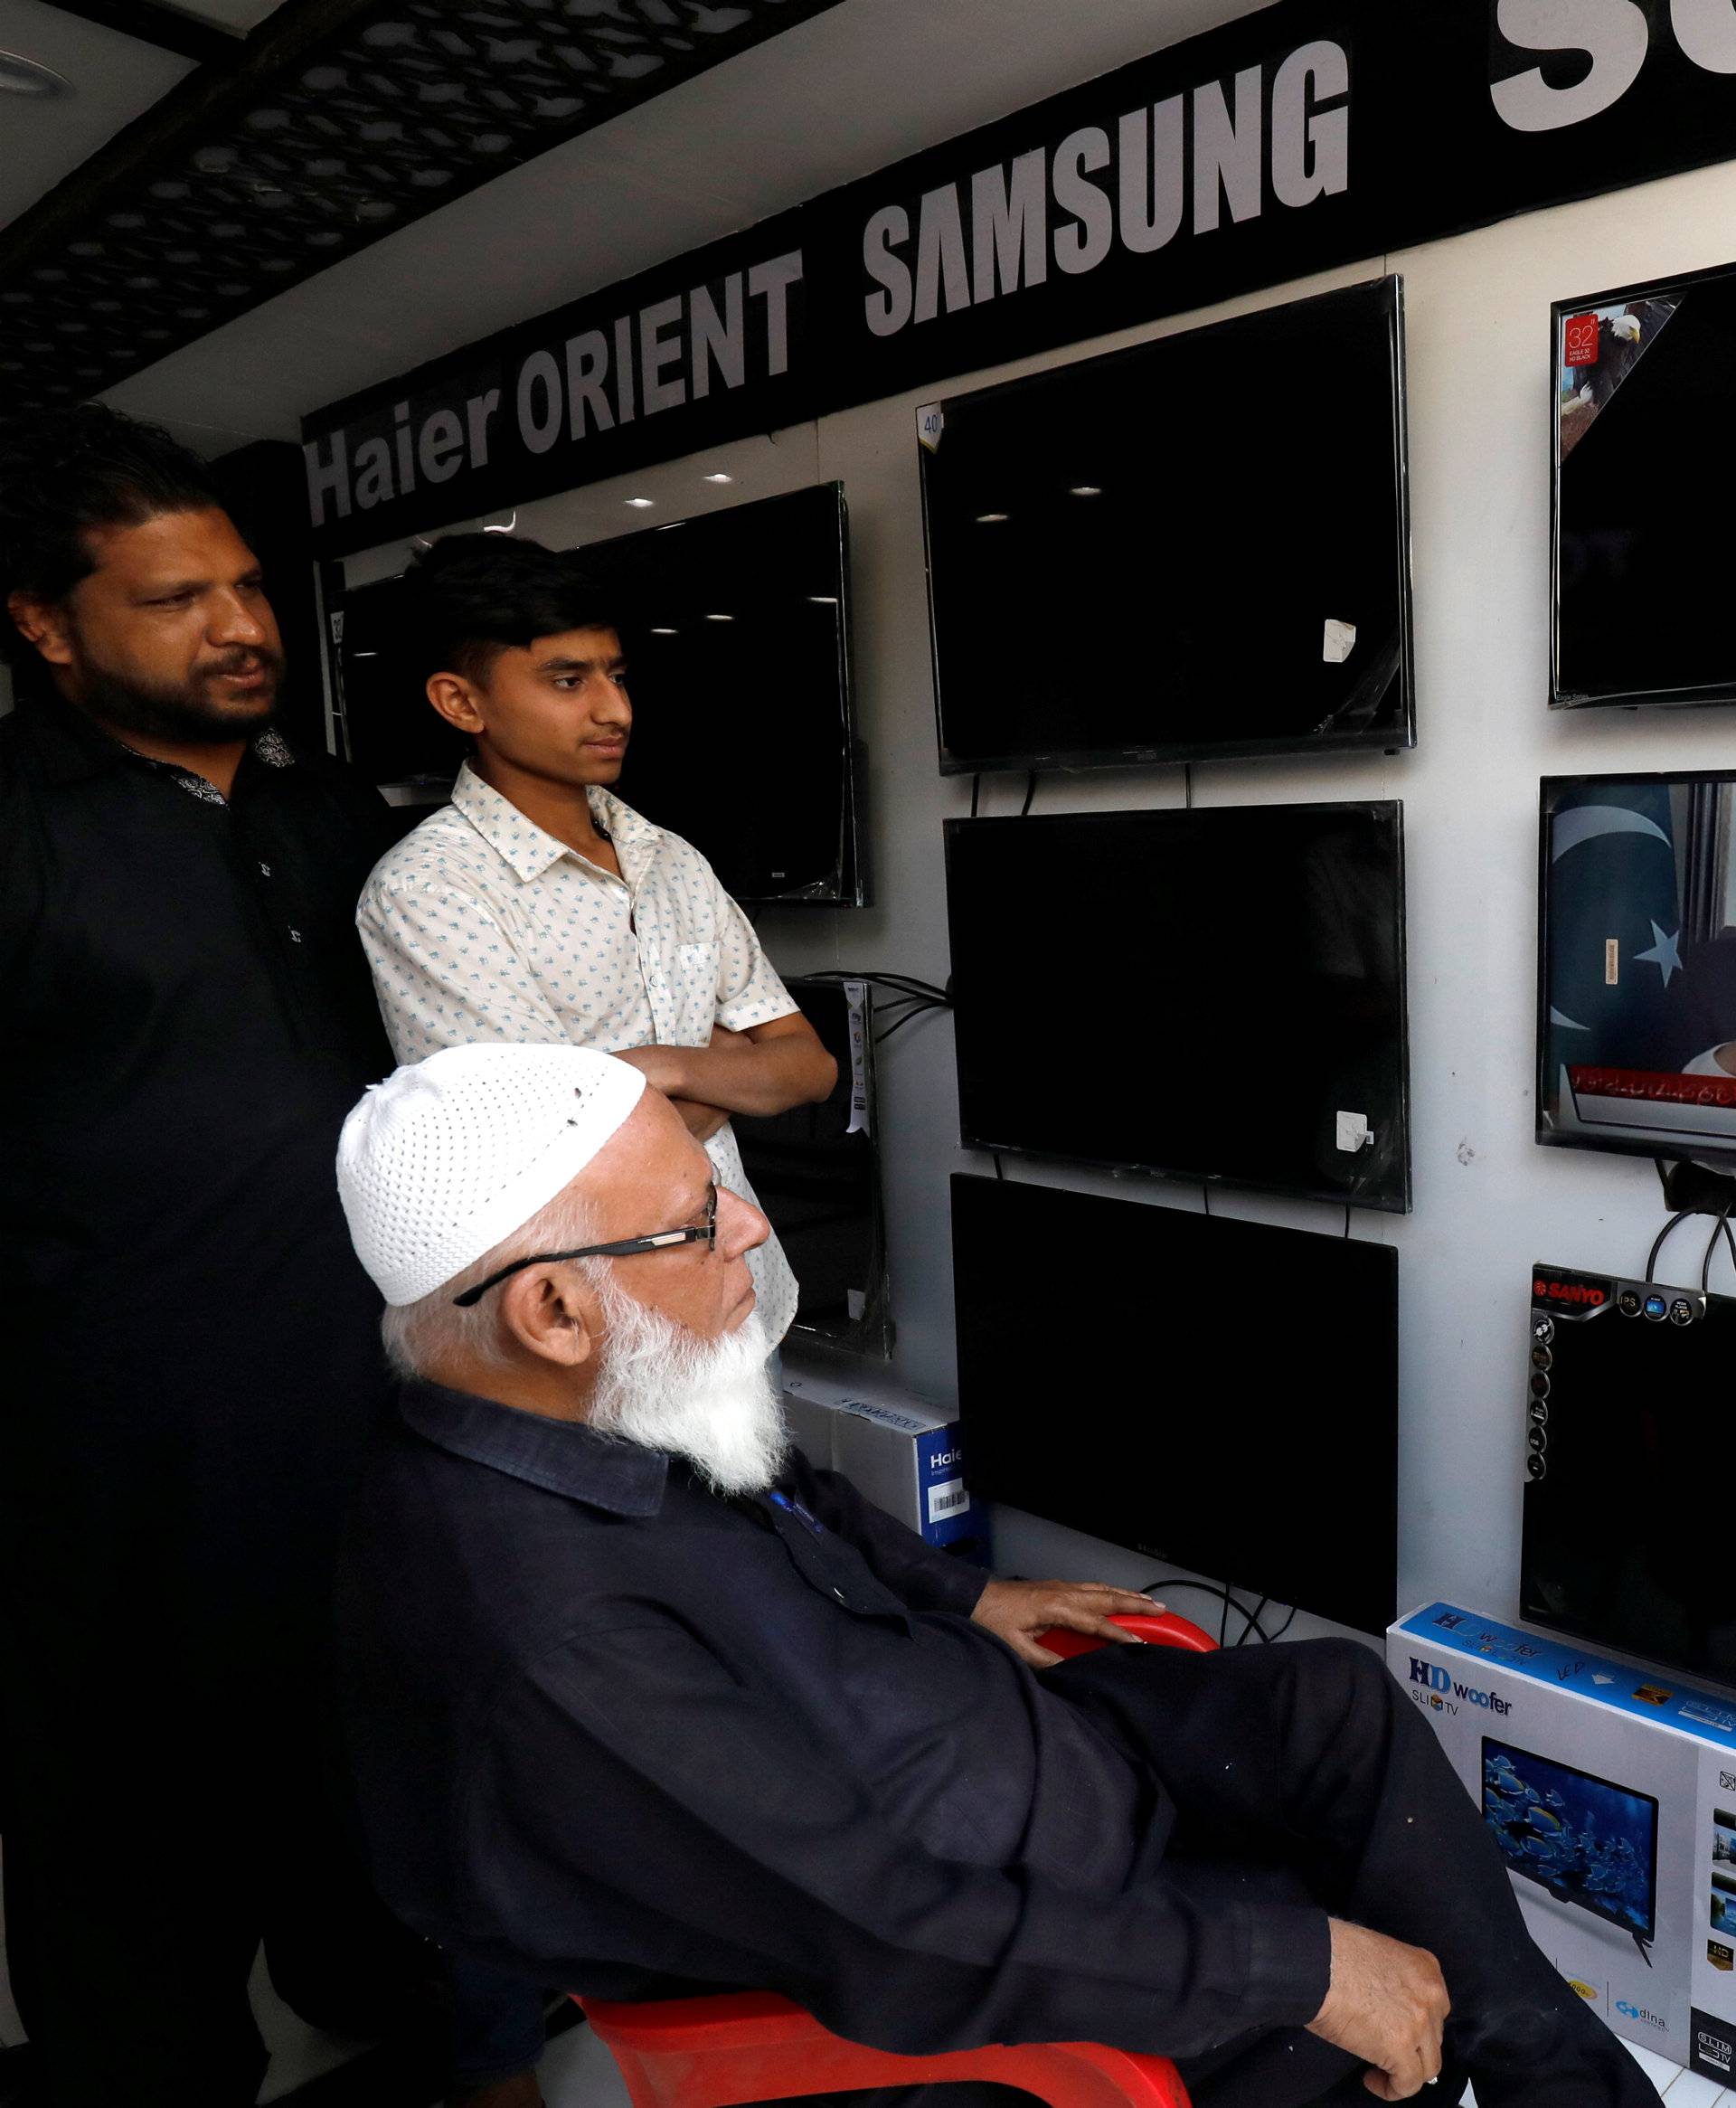 Shopkeepers watch the speech of Pakistani Prime Minister Imran Khan, after Pakistan shot down two Indian military aircrafts, at a shop selling television screens in Karachi